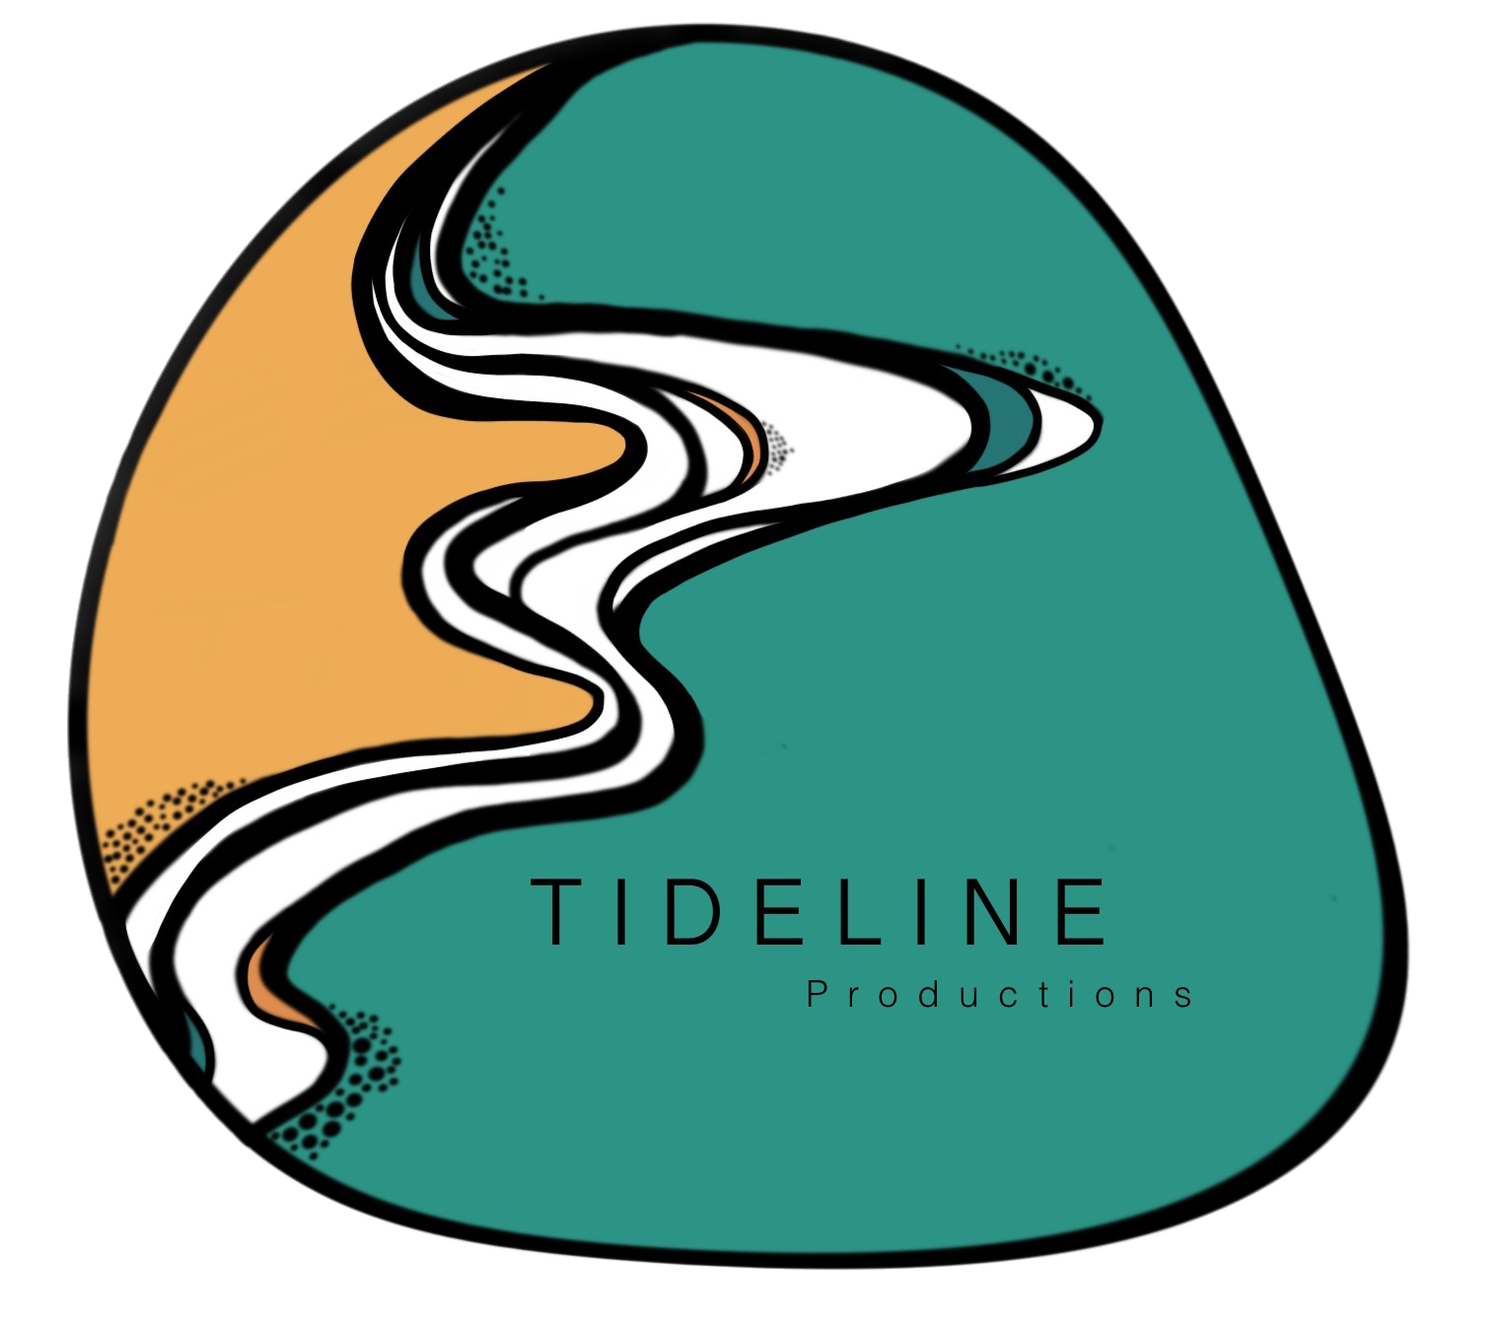 Tideline Productions